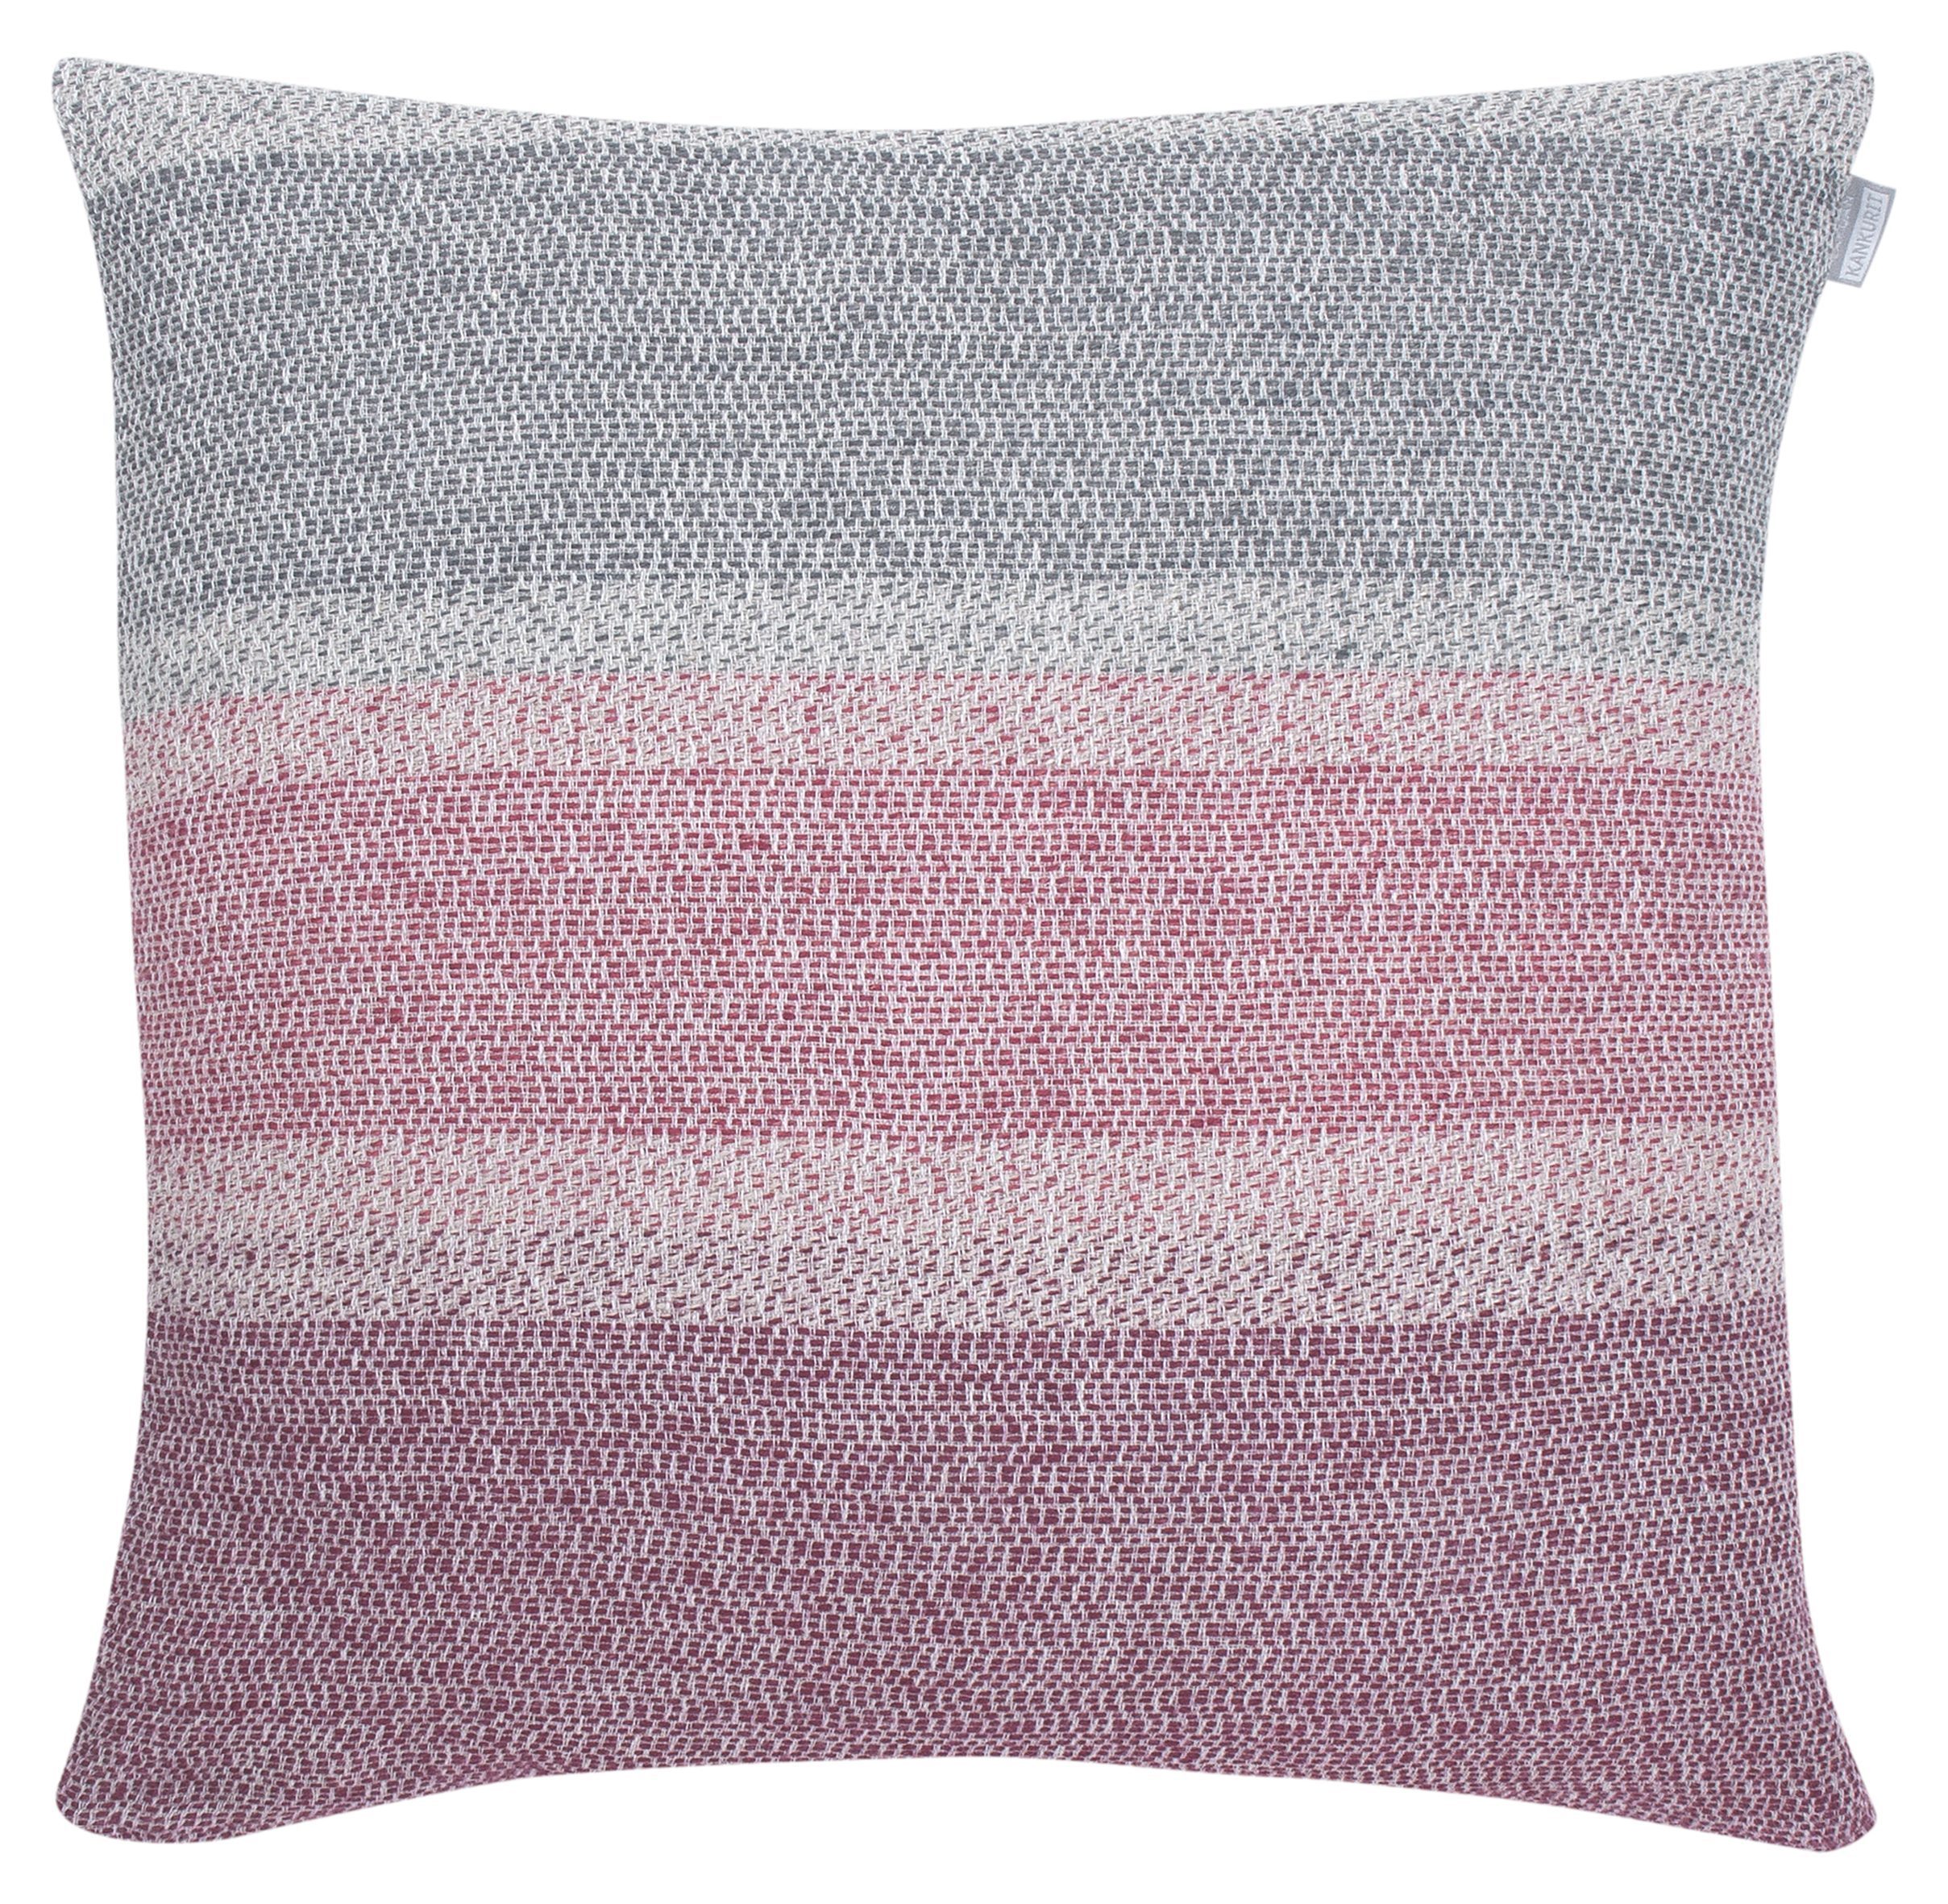 lapuankankurit_ruoste_cushion_cover_linen-red-grey_2